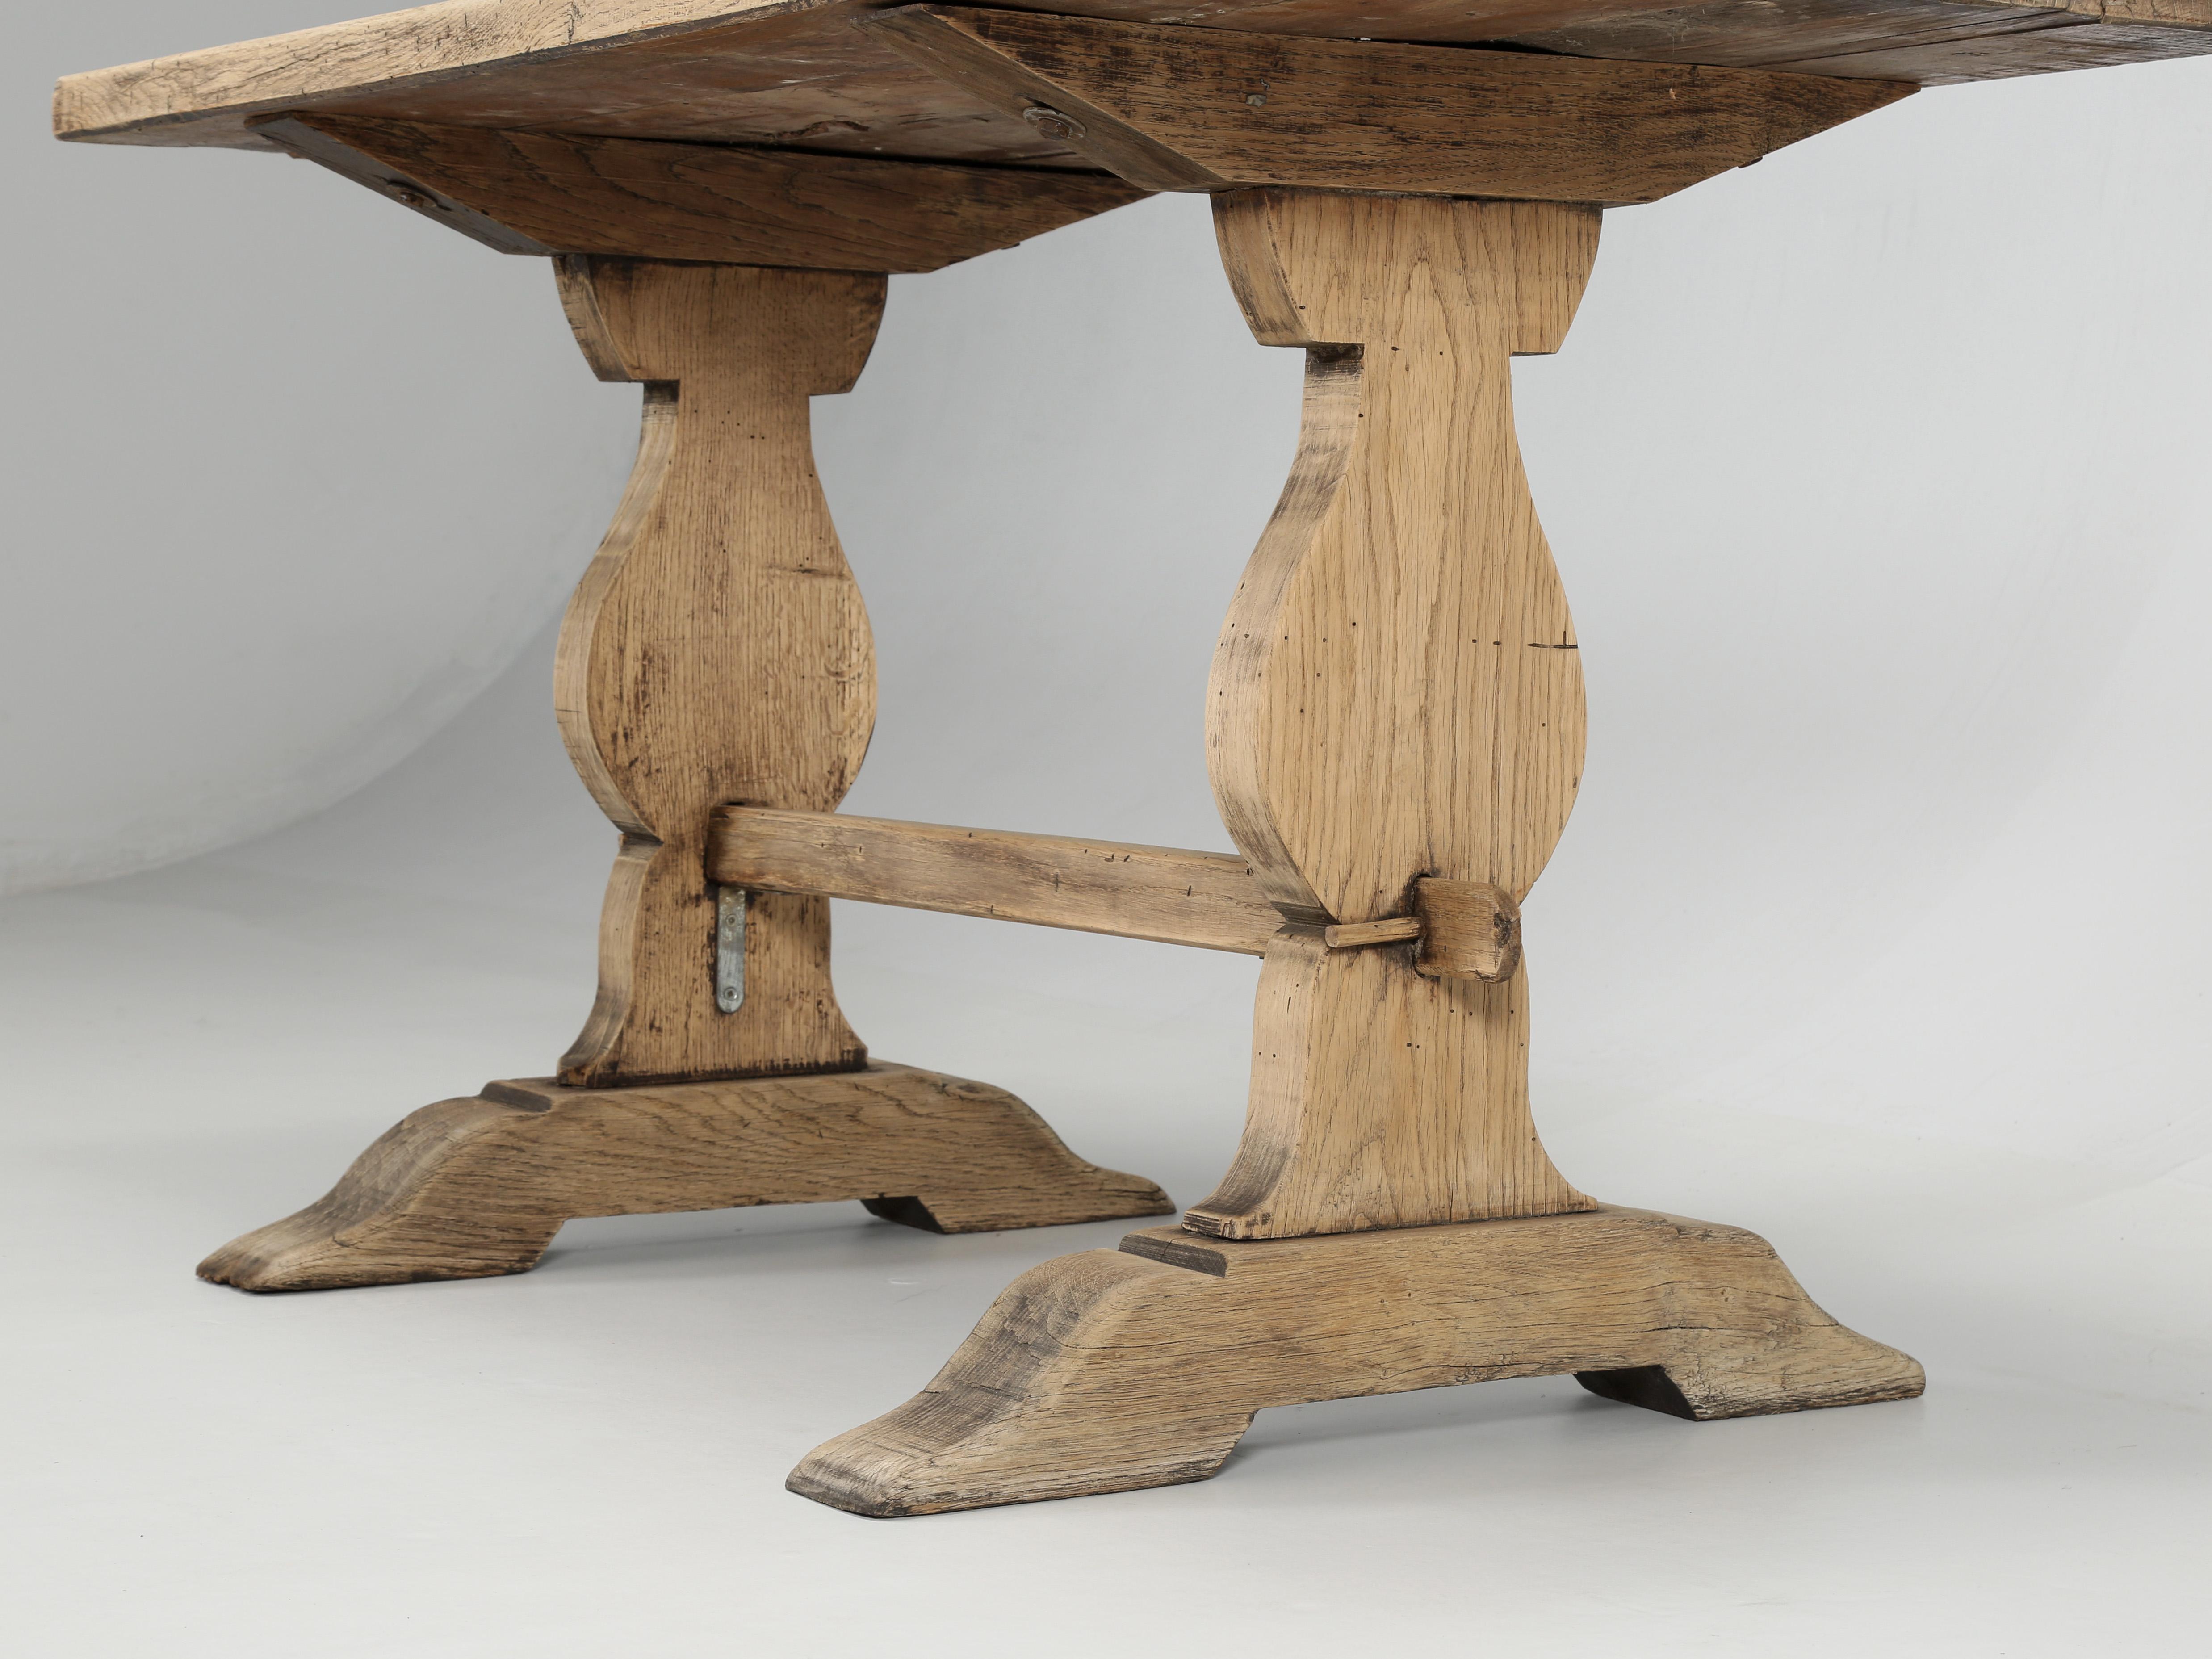 Antique French Bistro Table in Washed Natural White Oak, circa 1900-1920 4